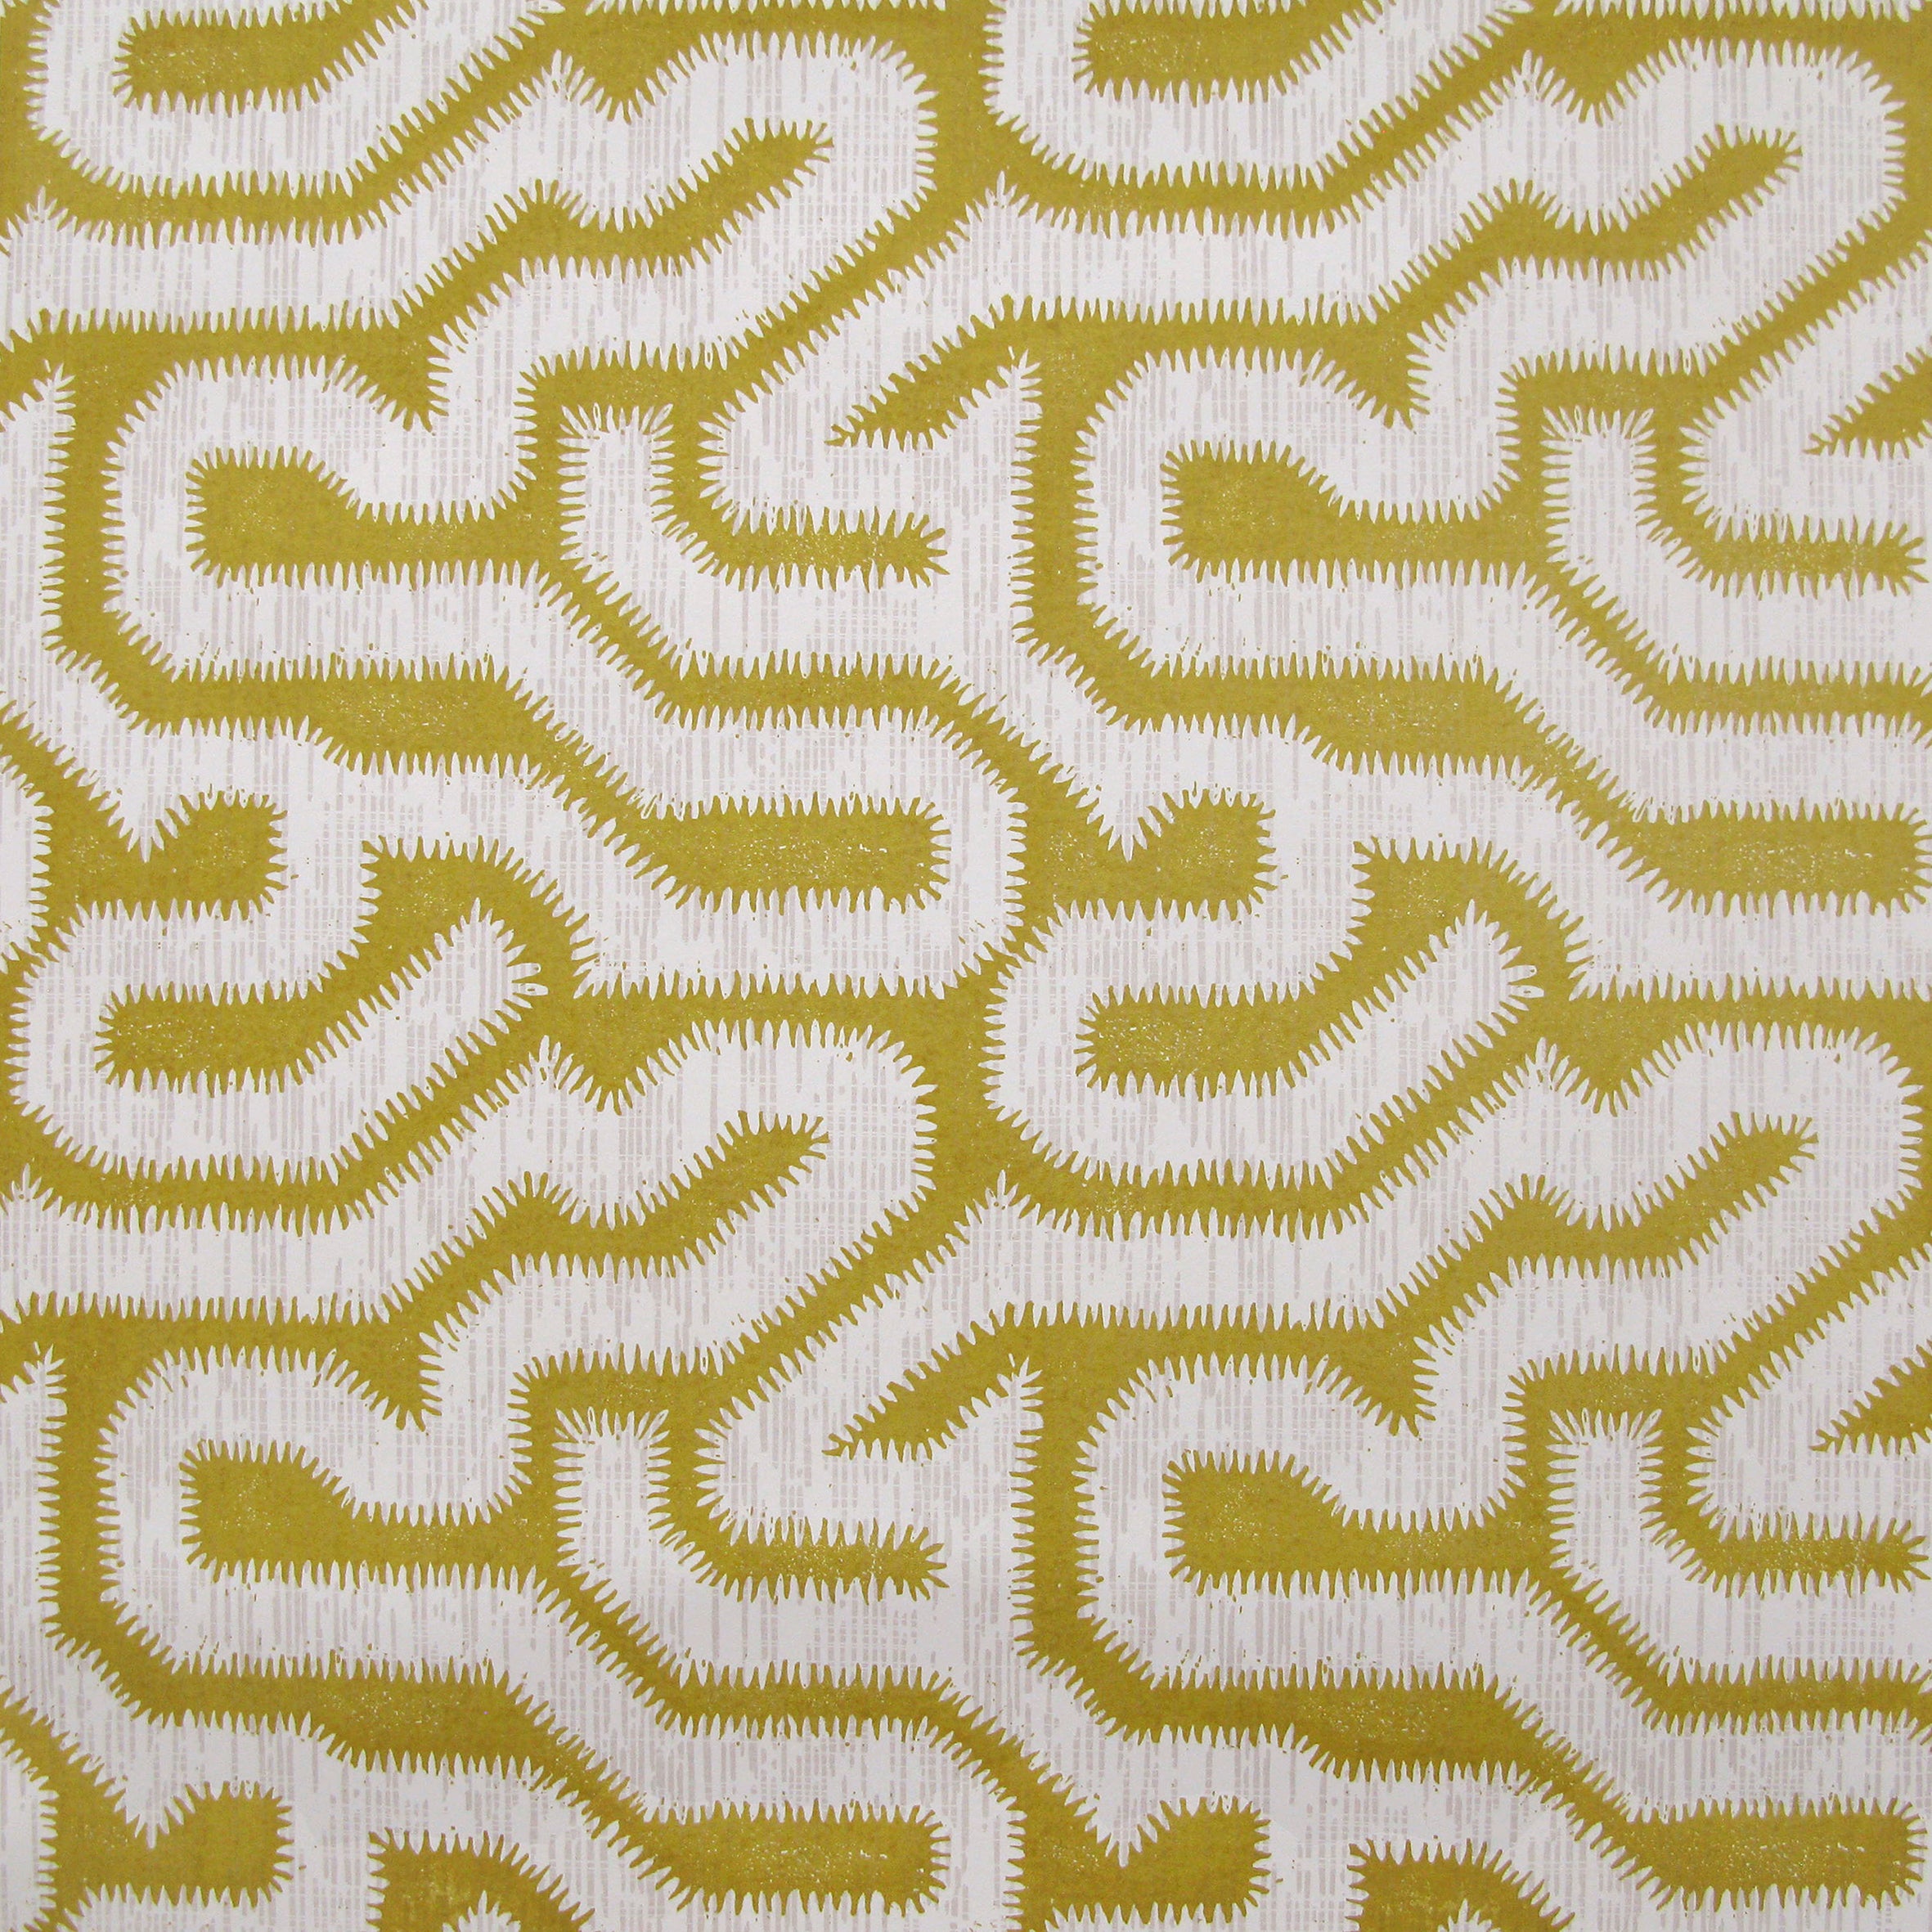 Detail of wallpaper in a playful meandering print in white on a mustard field.